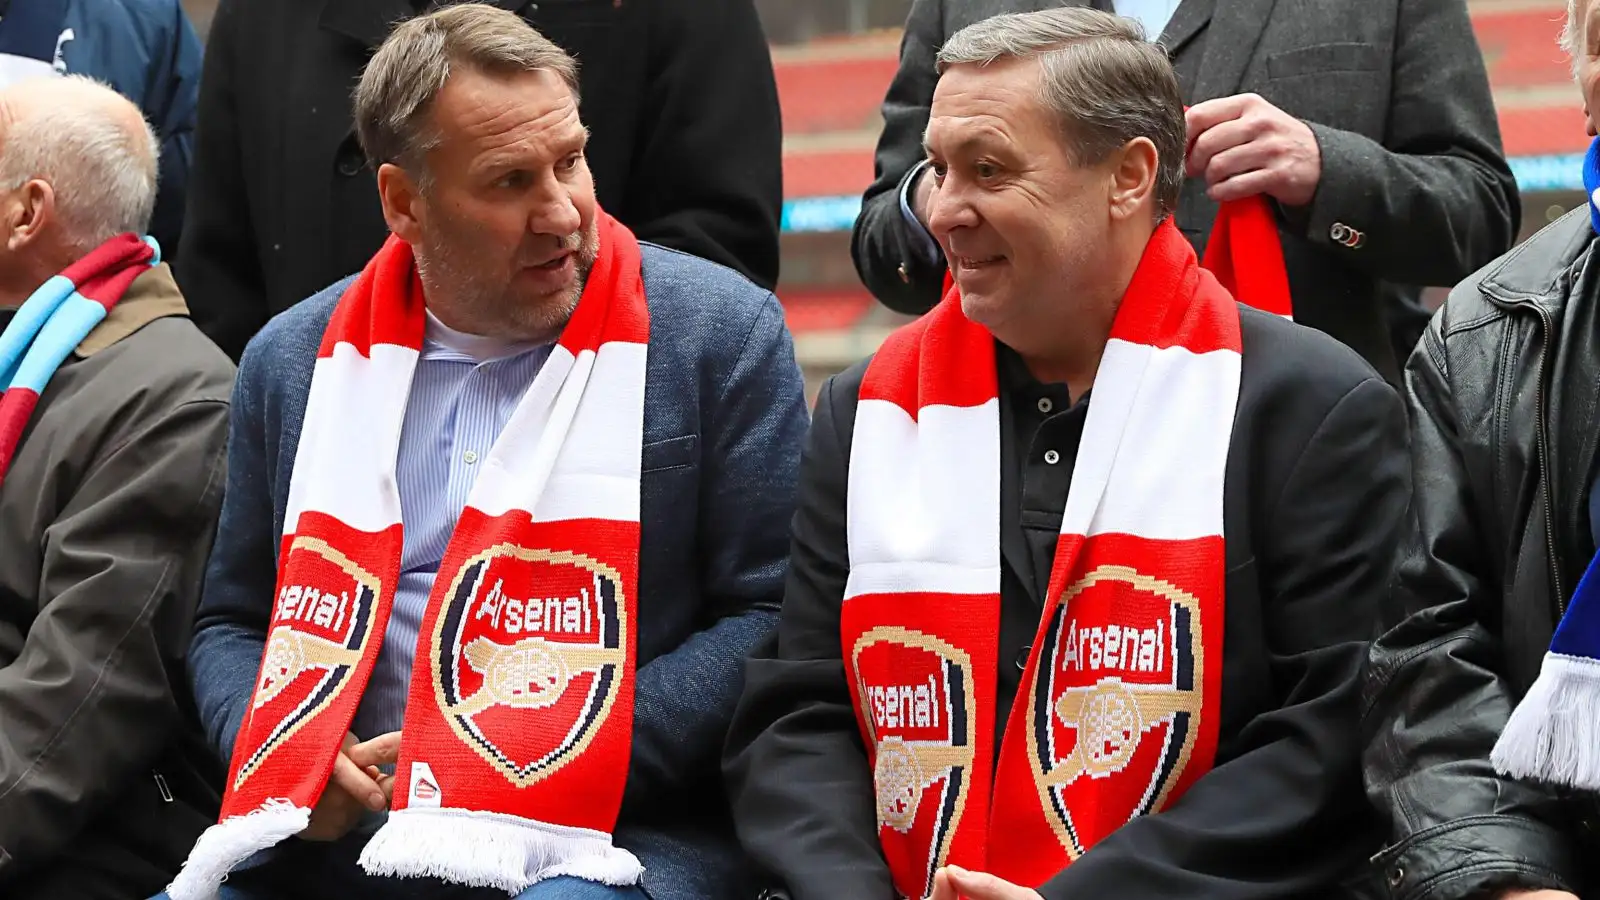 Arsenal icon Paul Merson during a photoshoot at the Emirates.